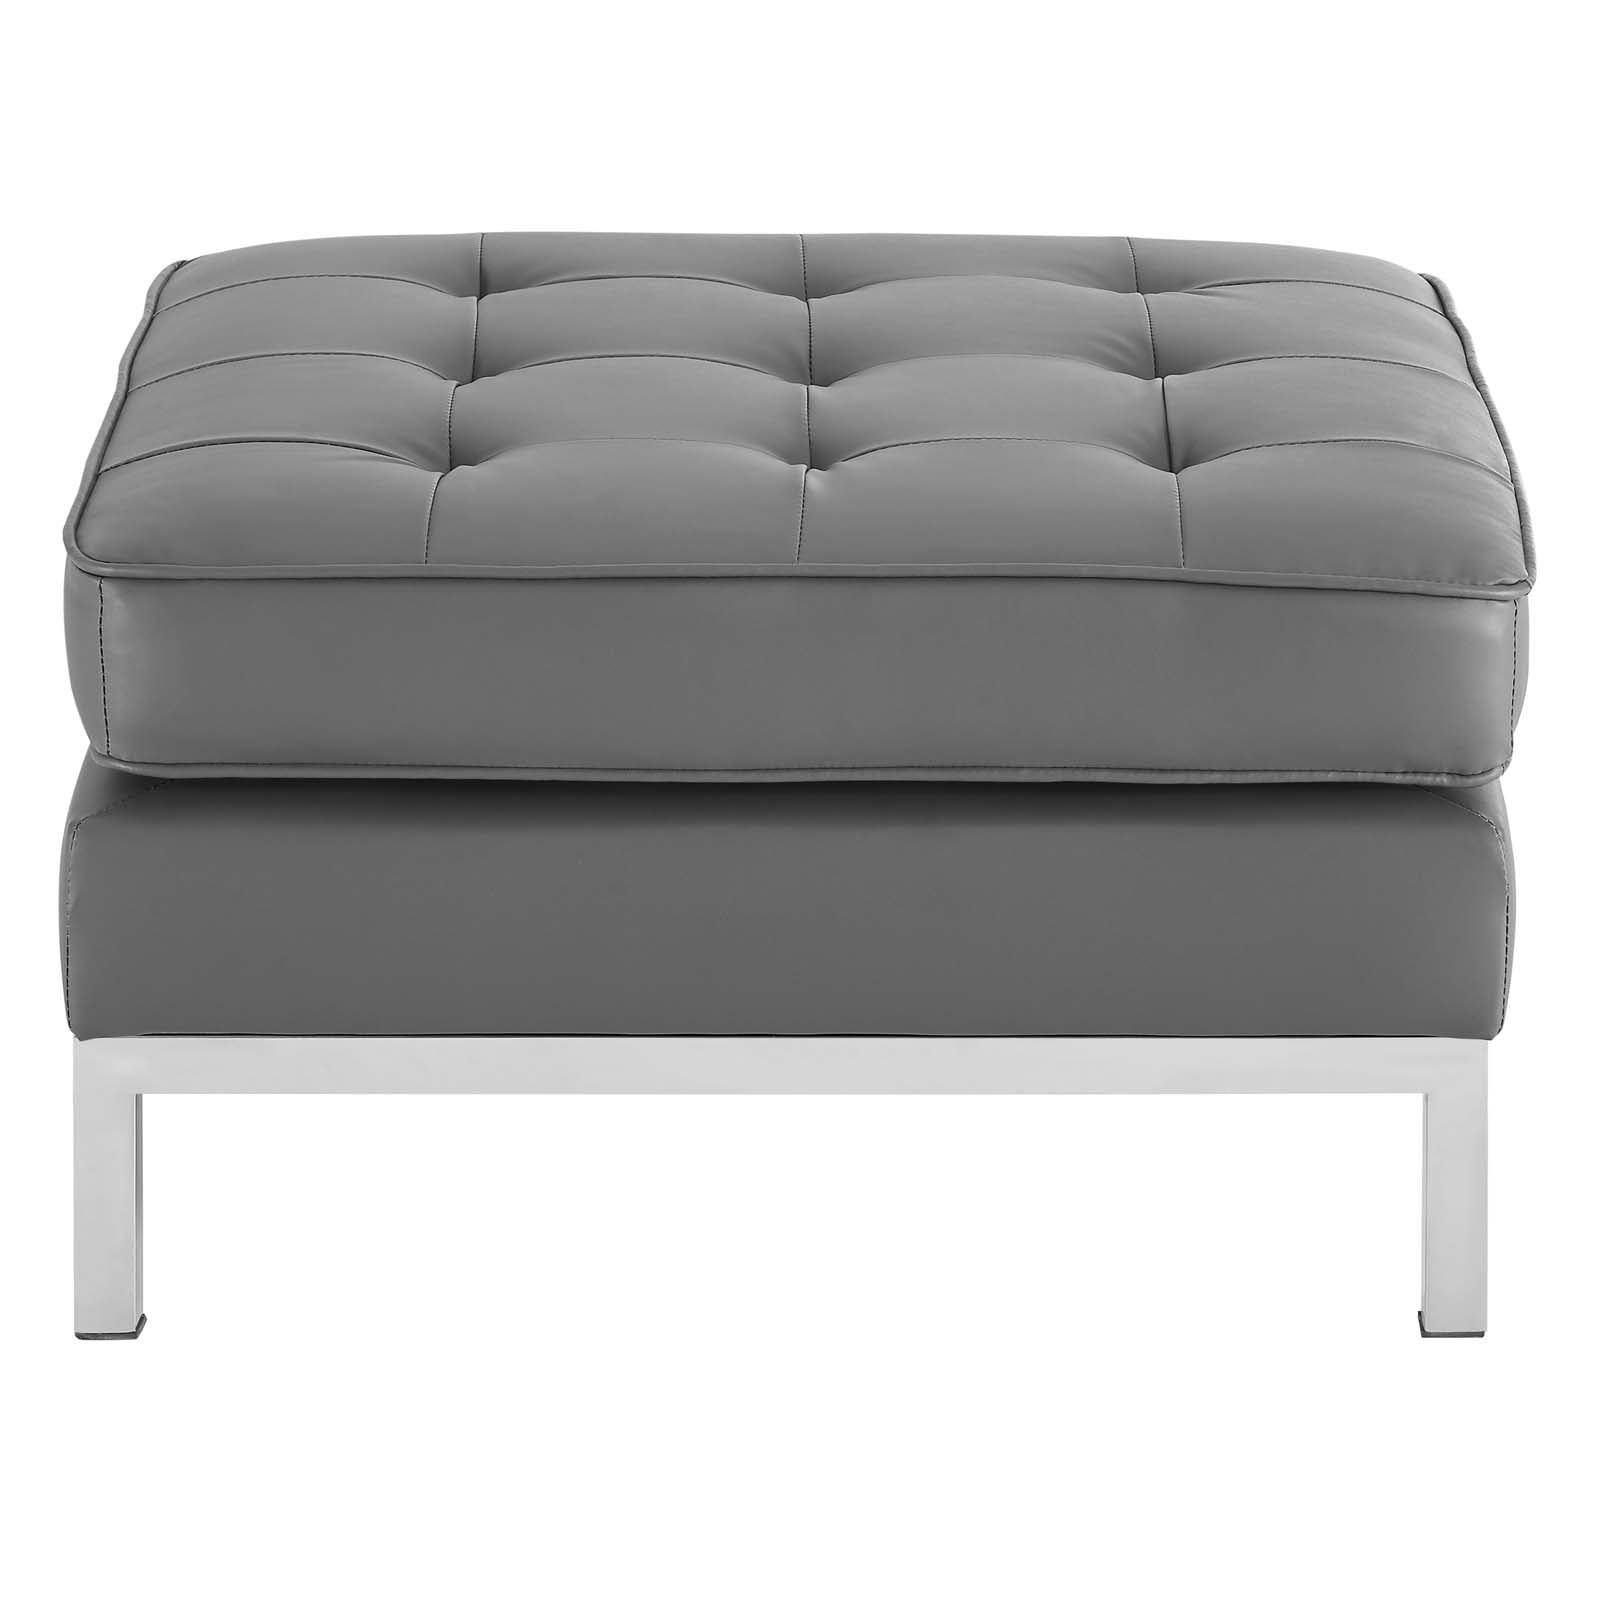 Modway Ottomans & Stools - Loft Tufted Upholstered Faux Leather Ottoman Silver Gray